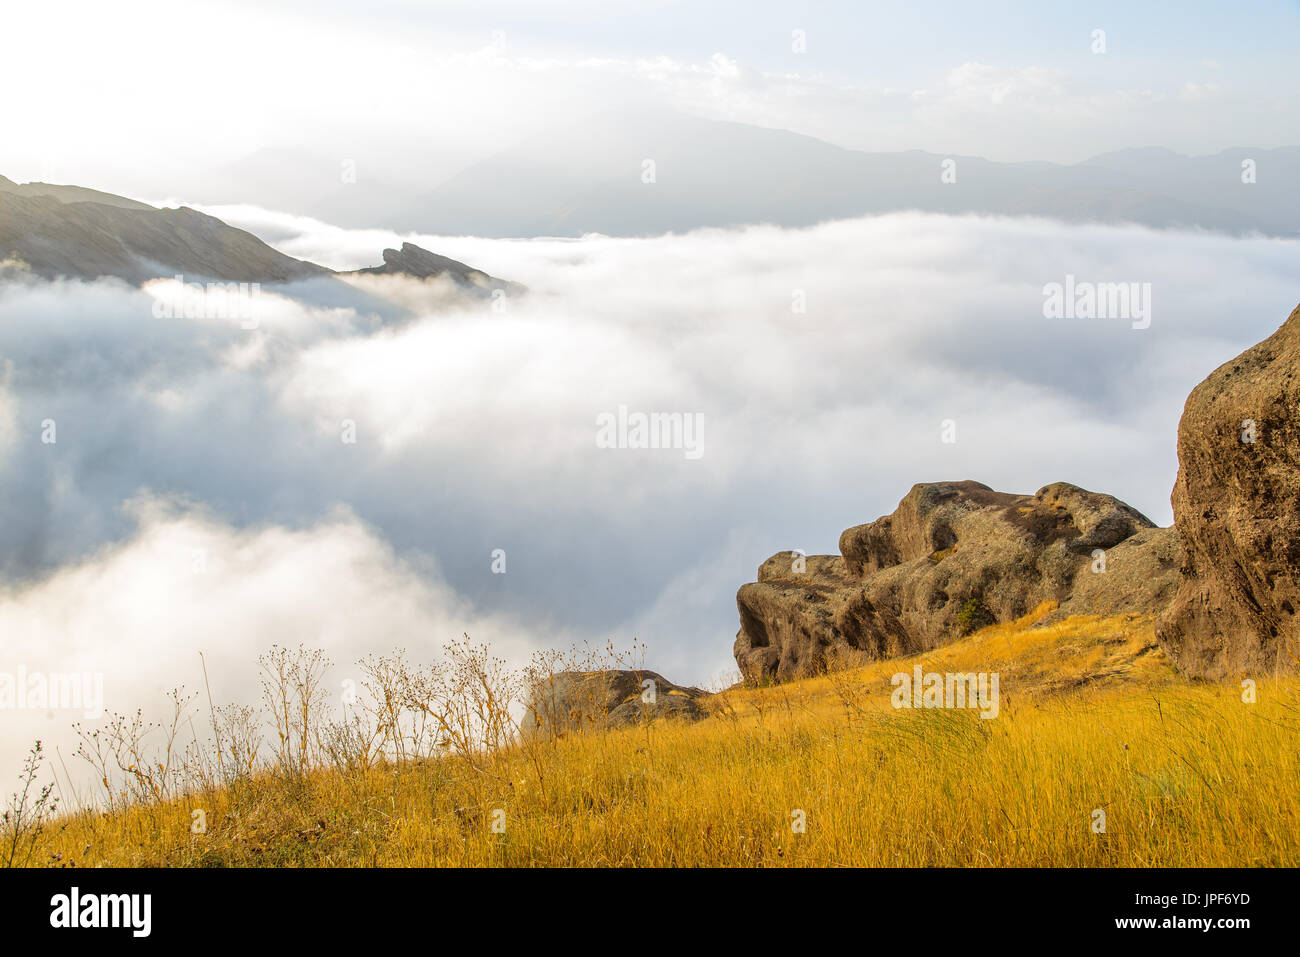 Morning sunrise over Alamat Castle in the Alborz mountains, Iran Stock Photo